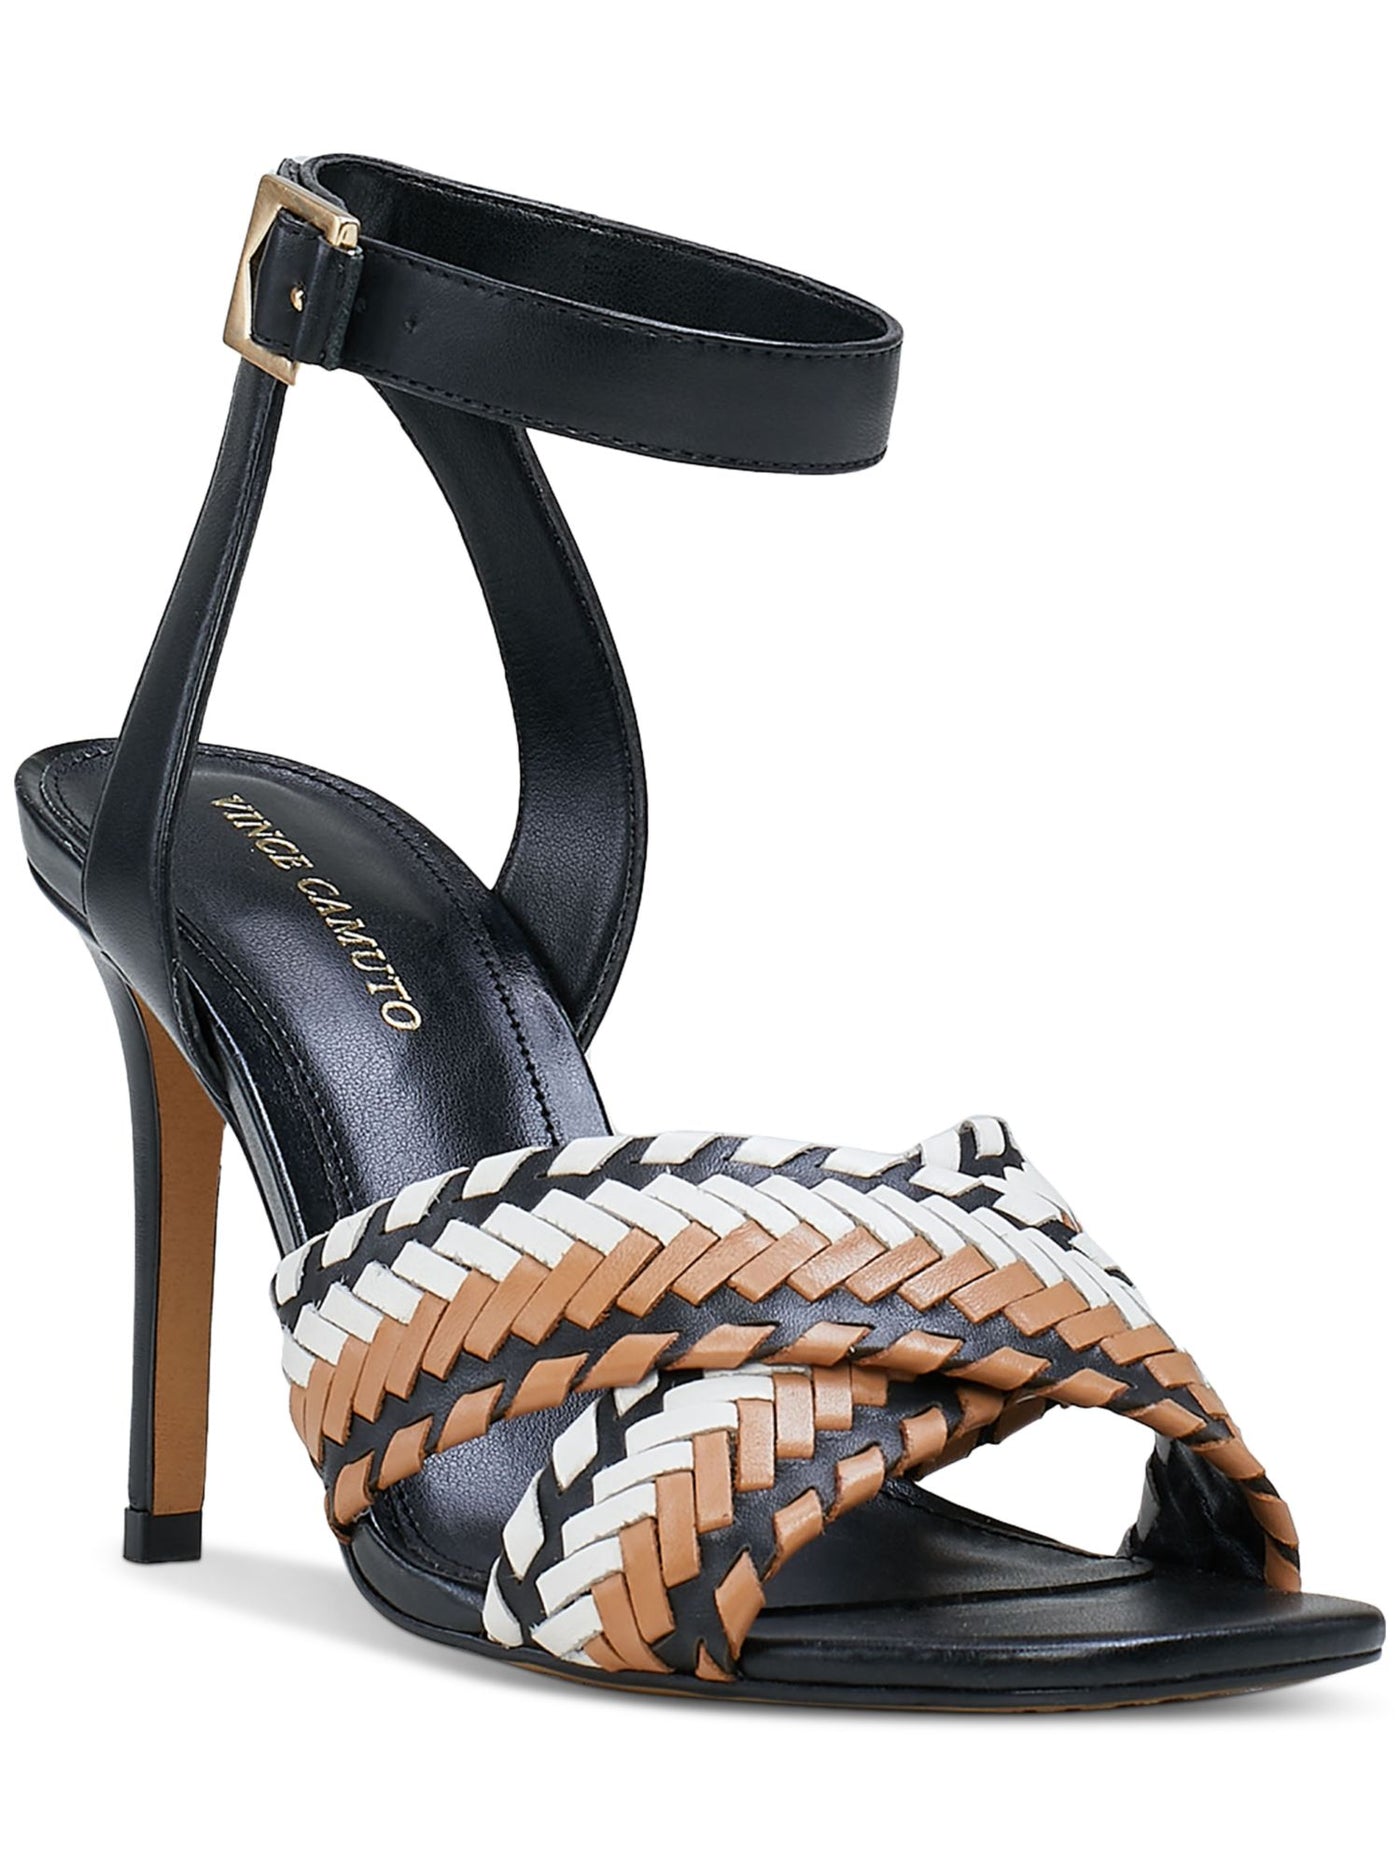 VINCE CAMUTO Womens Black Colorblocked Stripe Padded Ankle Strap Woven Ambrinna Square Toe Stiletto Buckle Leather Dress Heeled Sandal 7.5 M